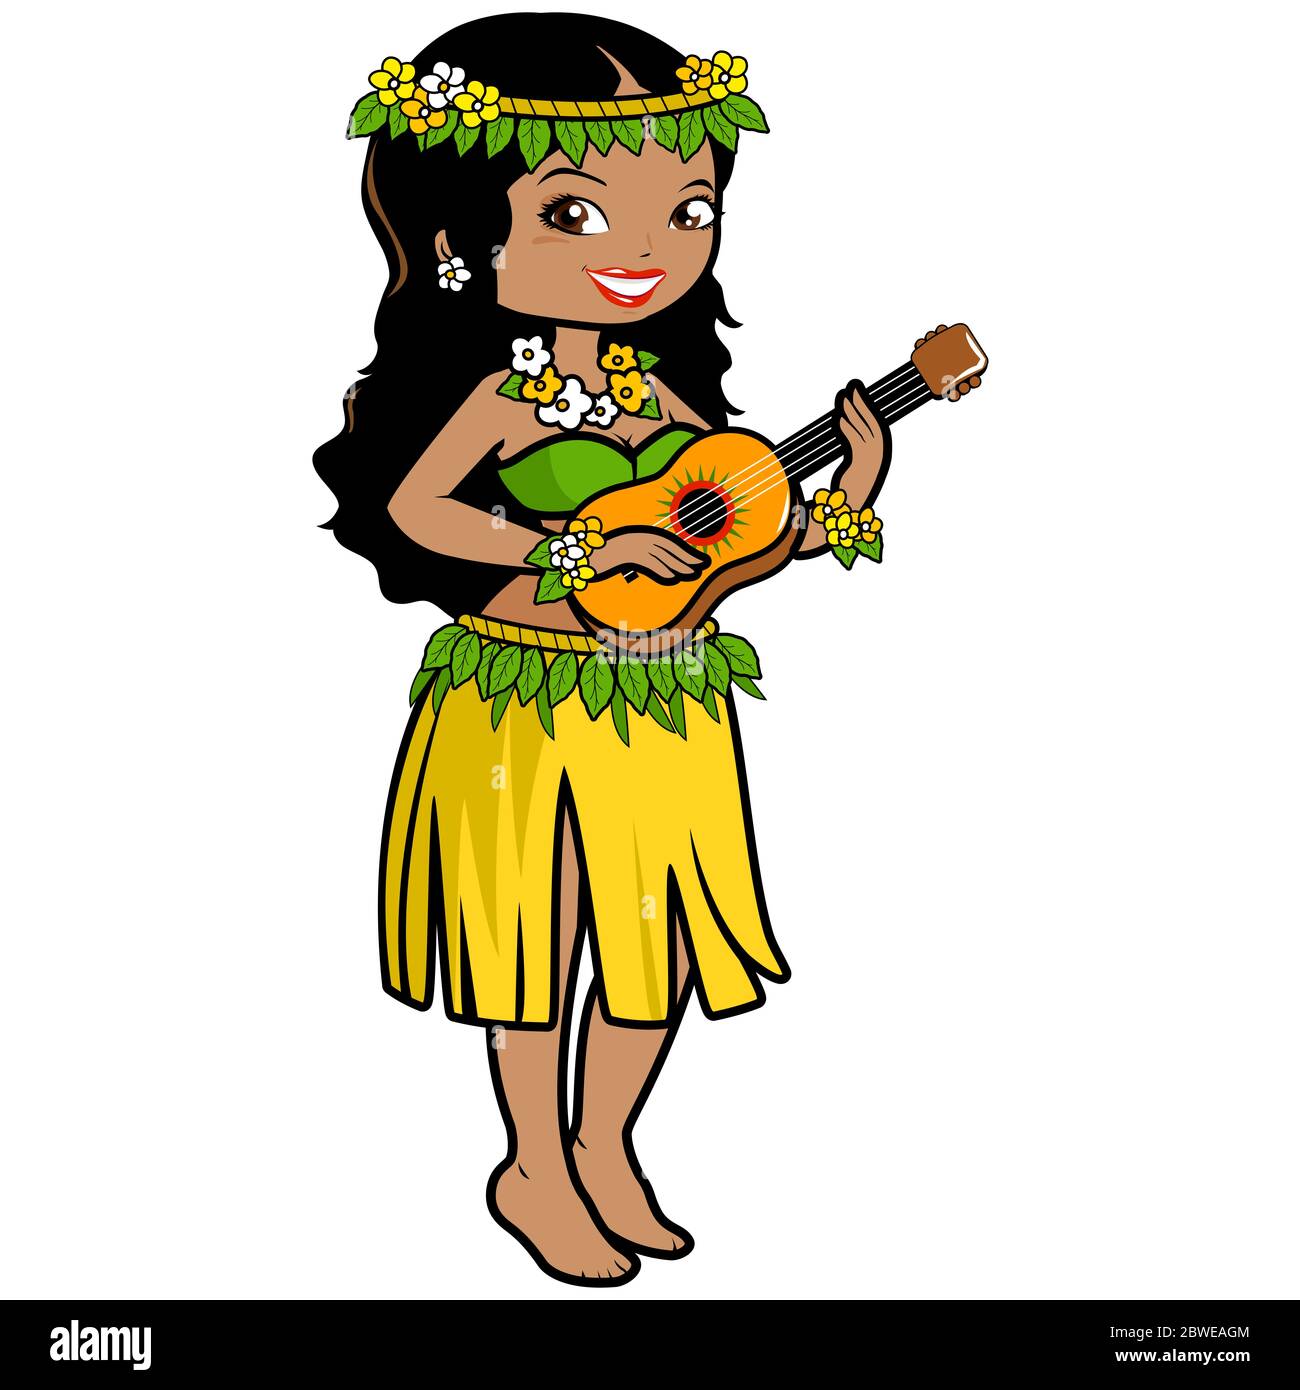 Hawaiian woman playing music with her guitar in a grass skirt and exotic flowers. Stock Photo